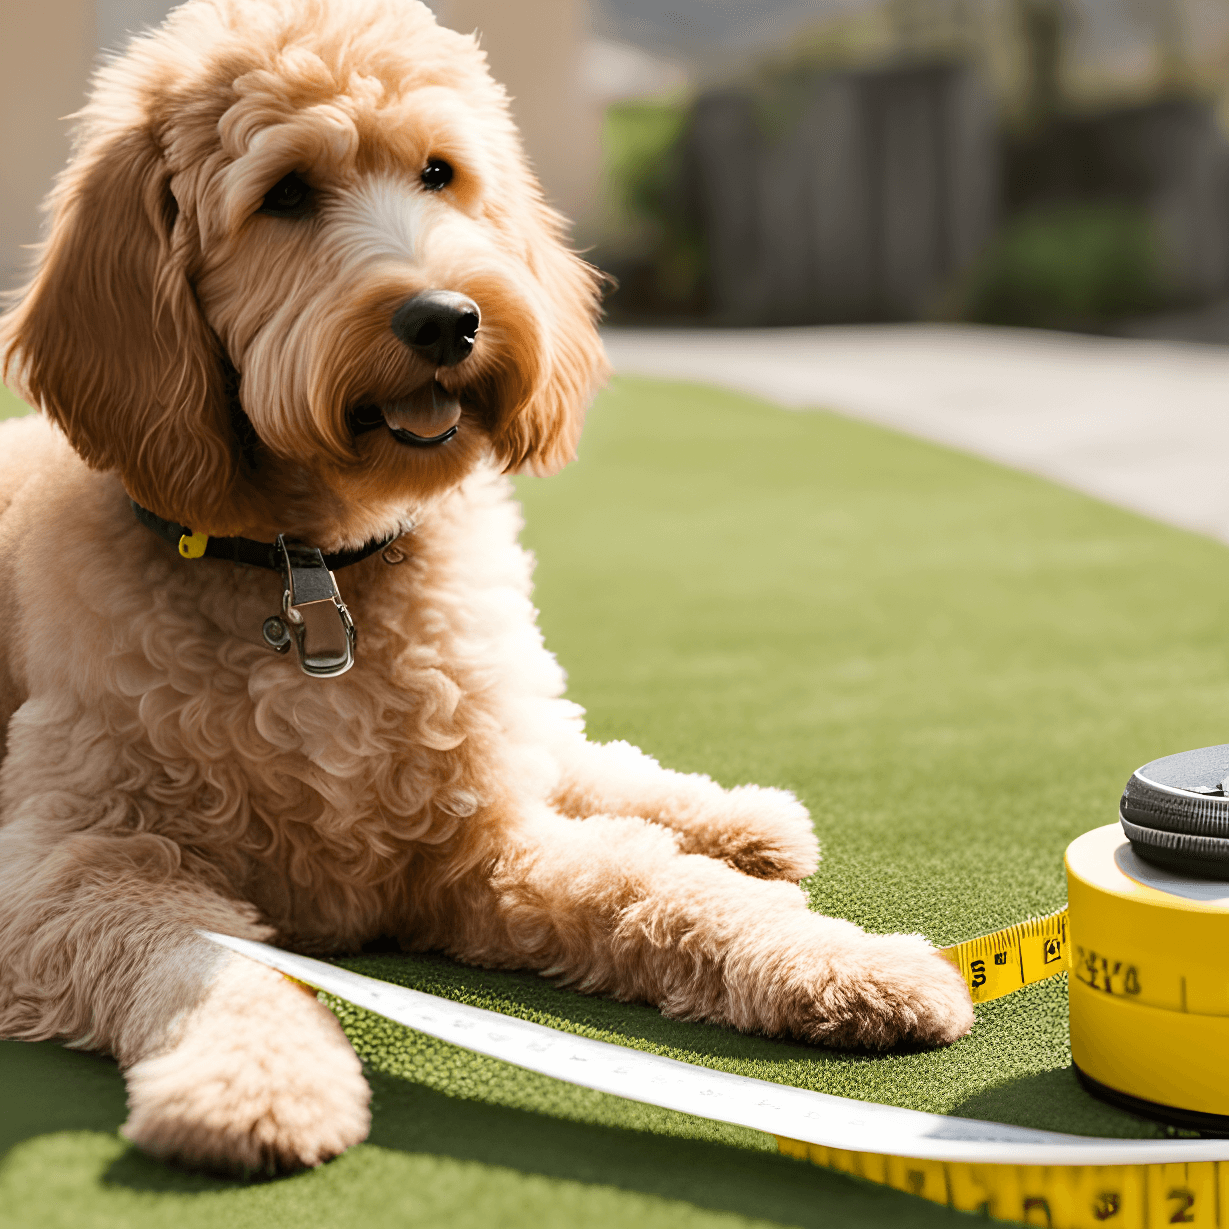 Labradoodle sitting with a tape measure